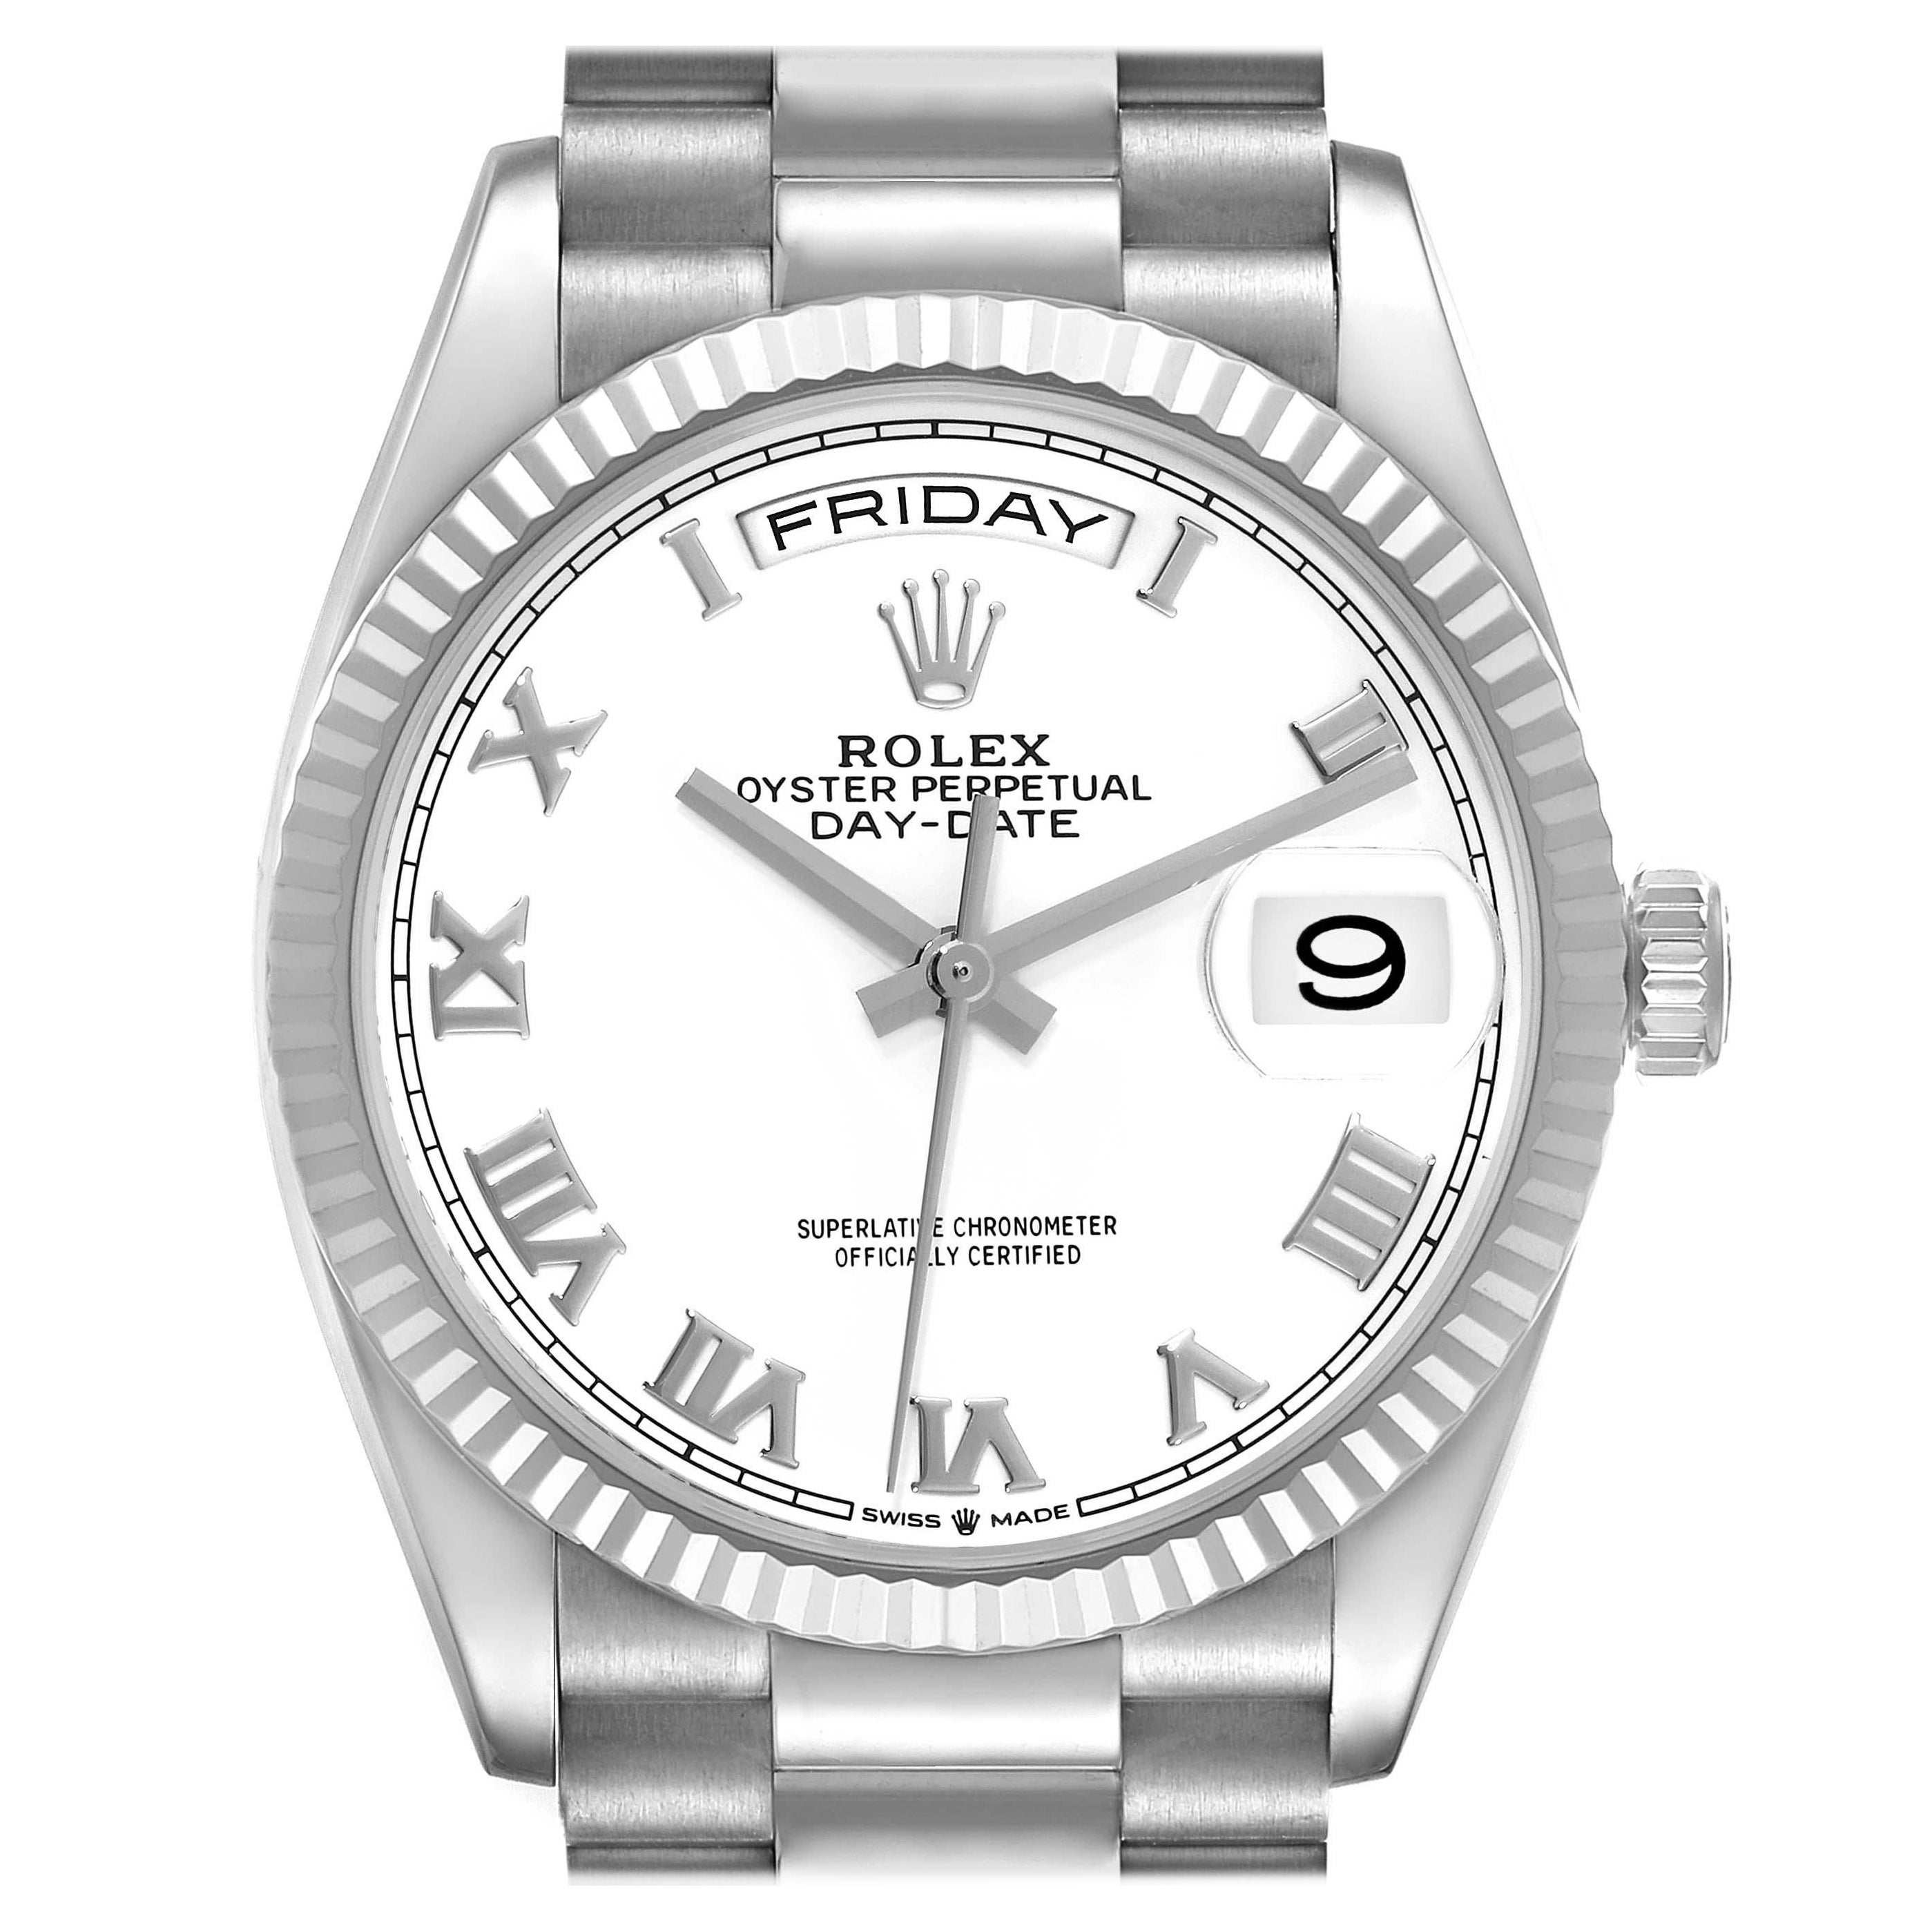 Rolex Day Date 36mm President White Gold White Dial Mens Watch 128239 Box Card